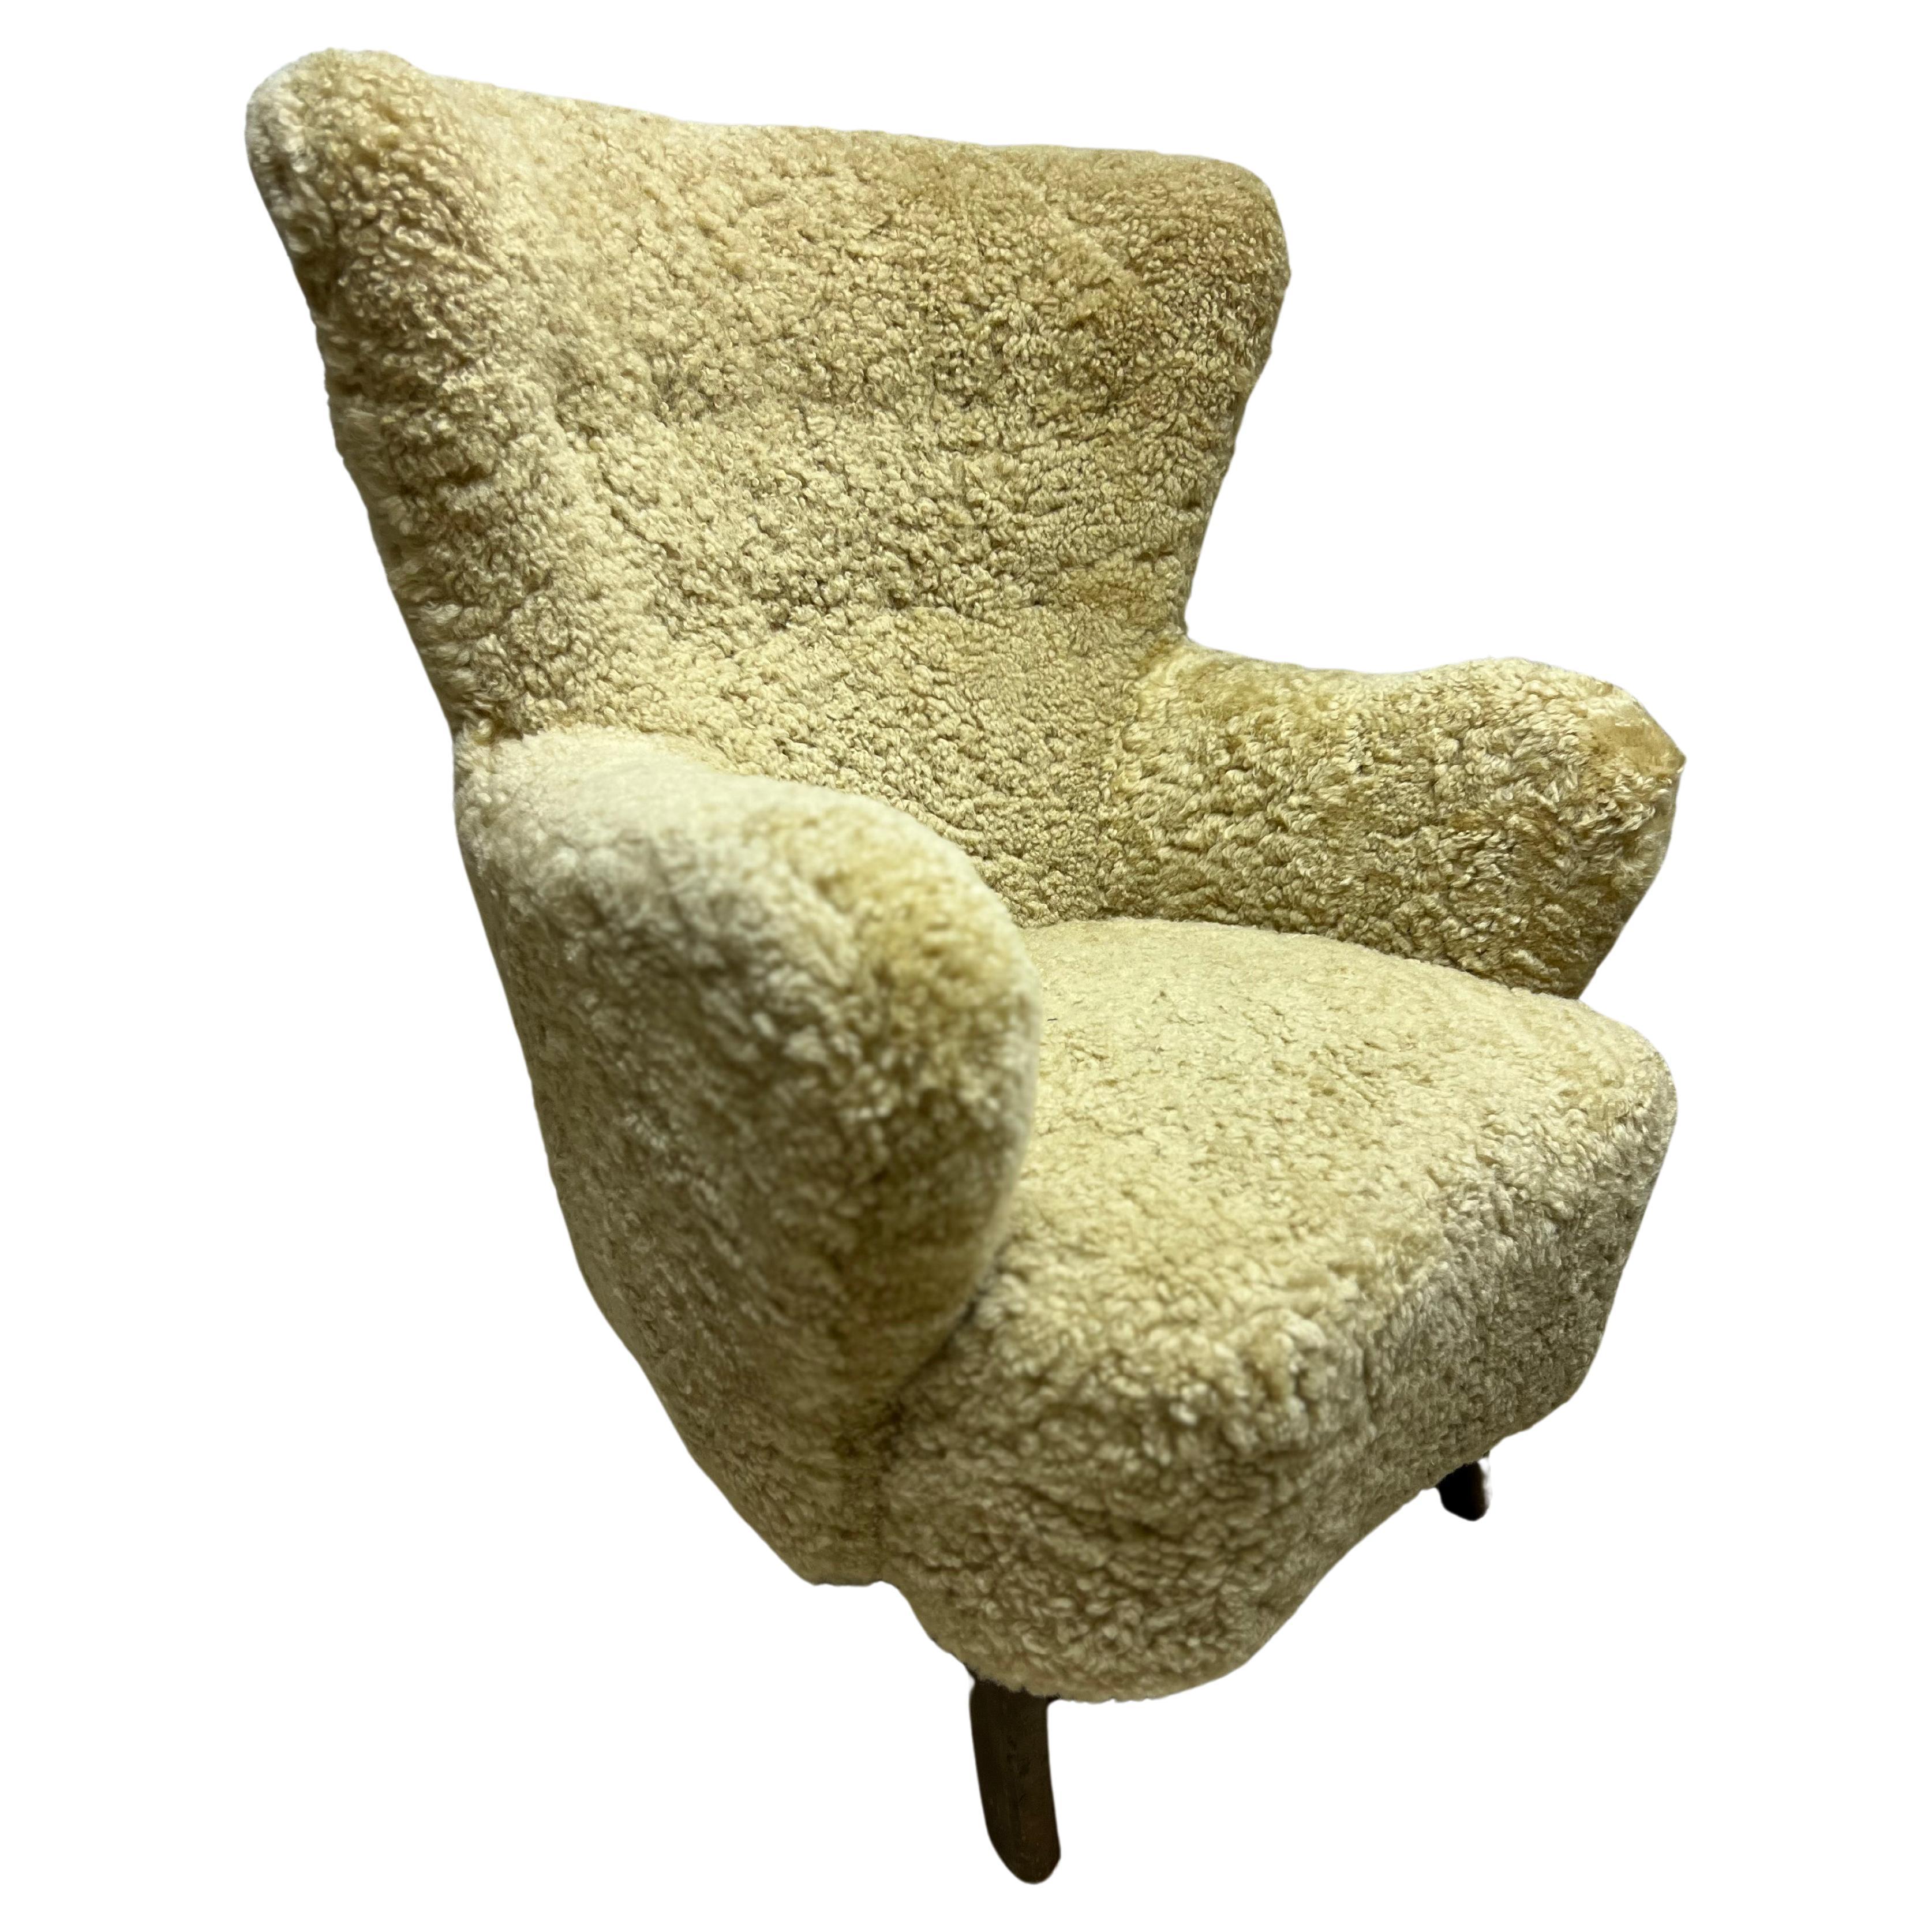 Sheepskin Pair of Shearling Chairs by Alfred Christensen, Denmark circa 1950 For Sale